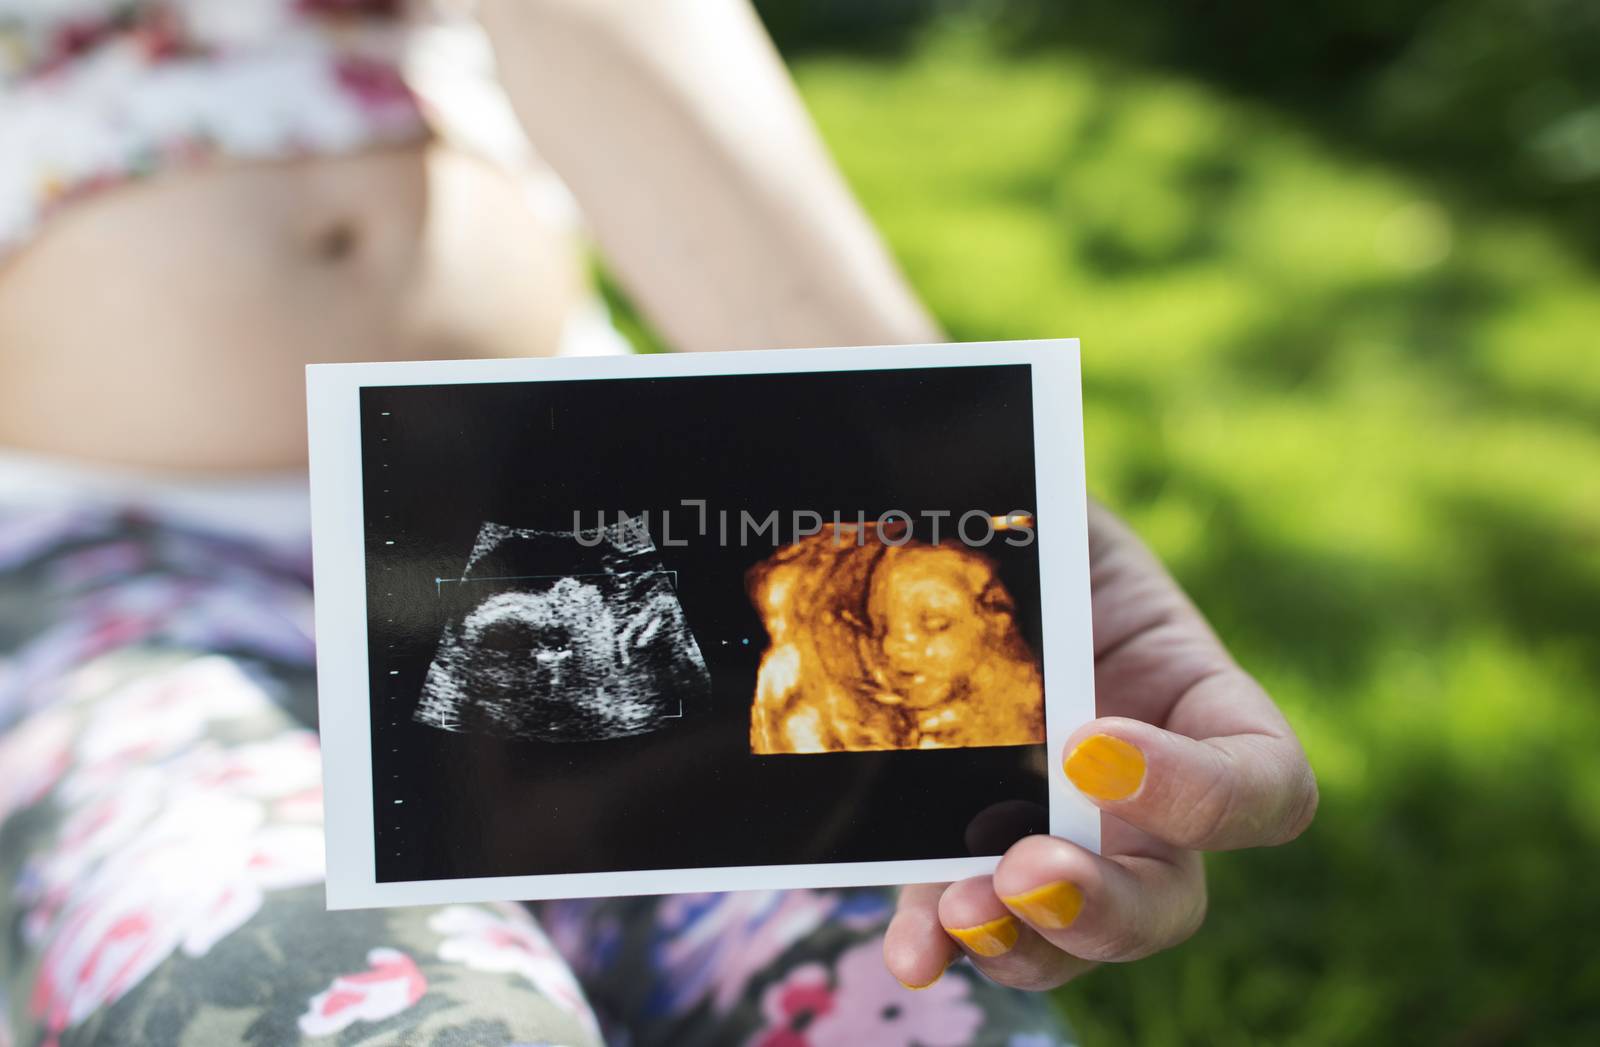 Pregnant women hold picture of womb. Daylight in the garden